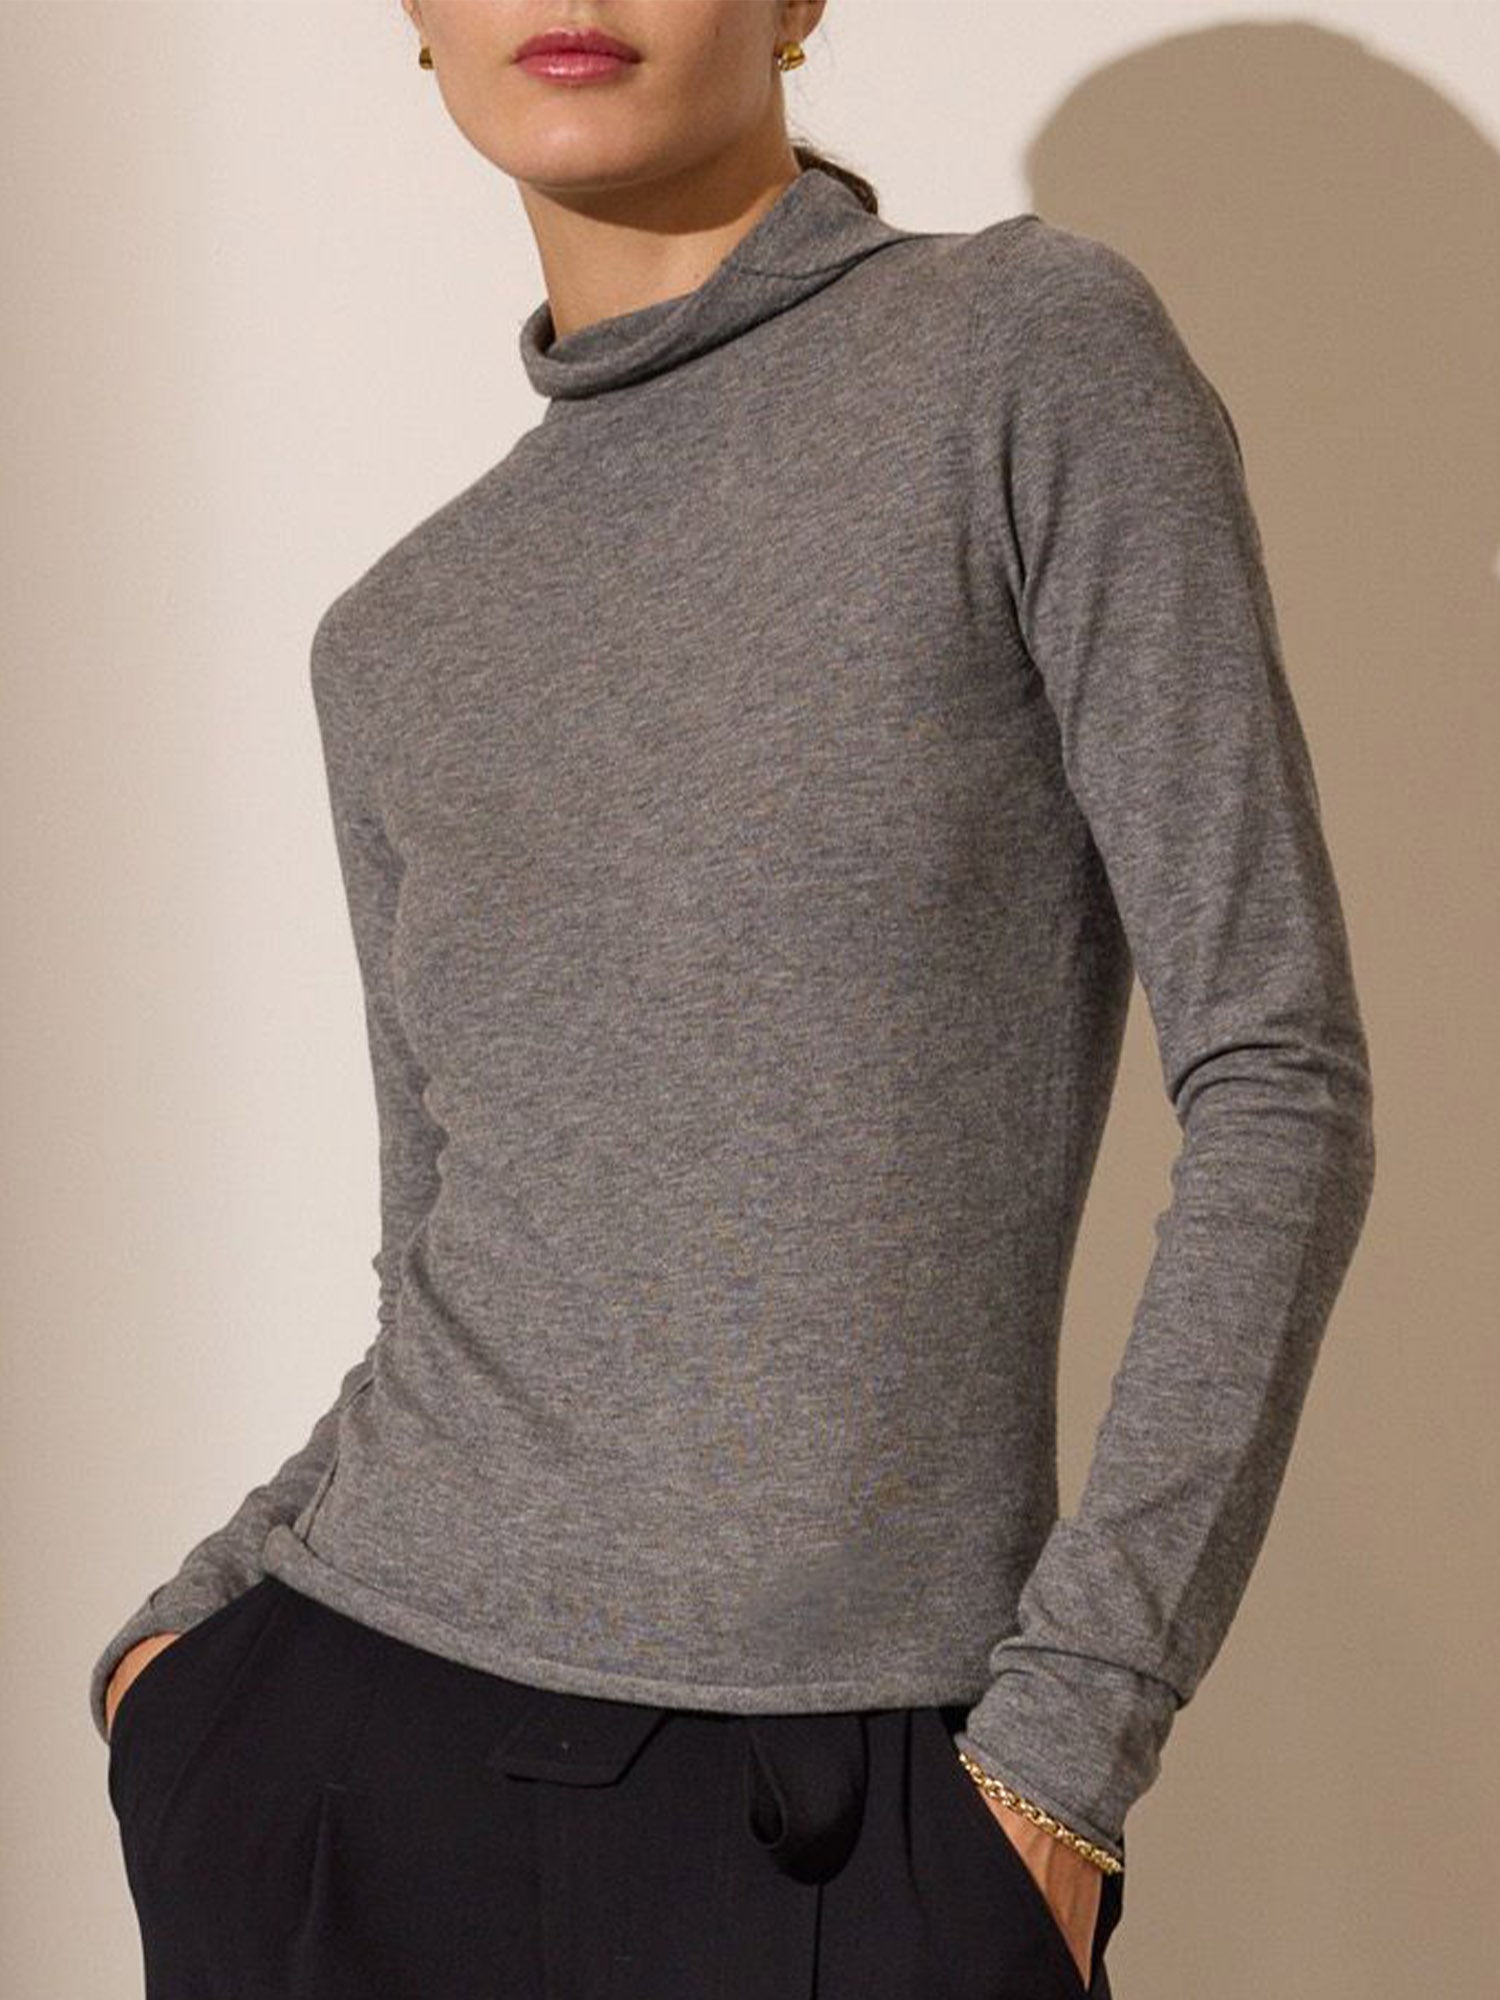 Anika grey mock neck top front view 